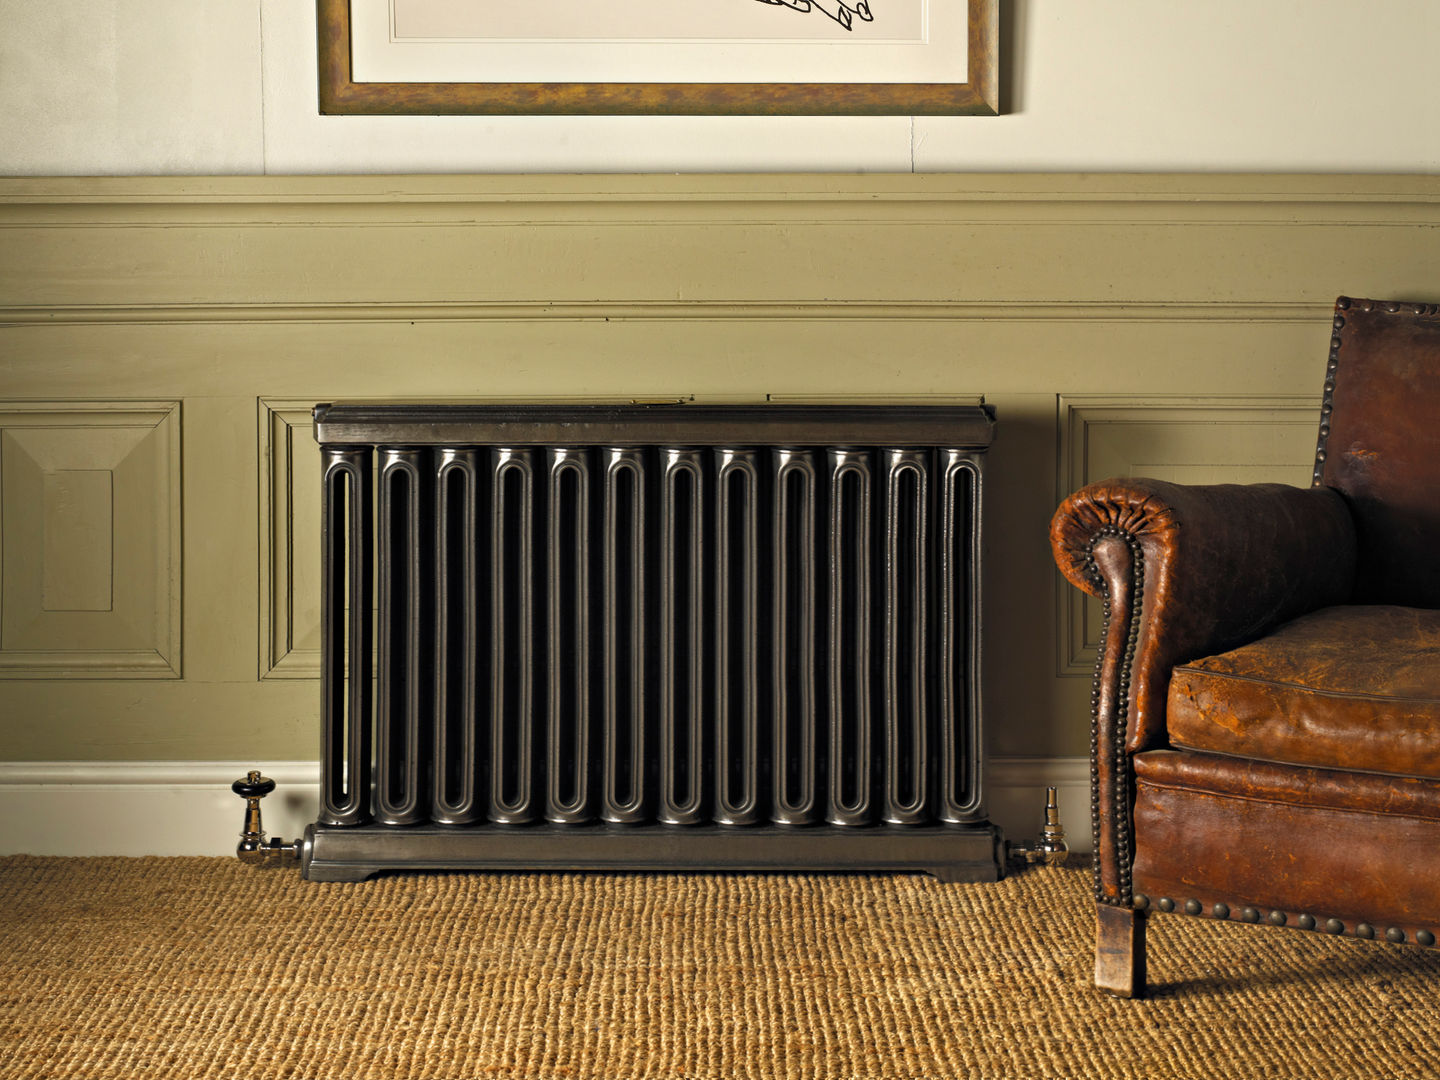 Radiators, Vintage and Architectural Vintage and Architectural 现代客厅設計點子、靈感 & 圖片 配件與裝飾品